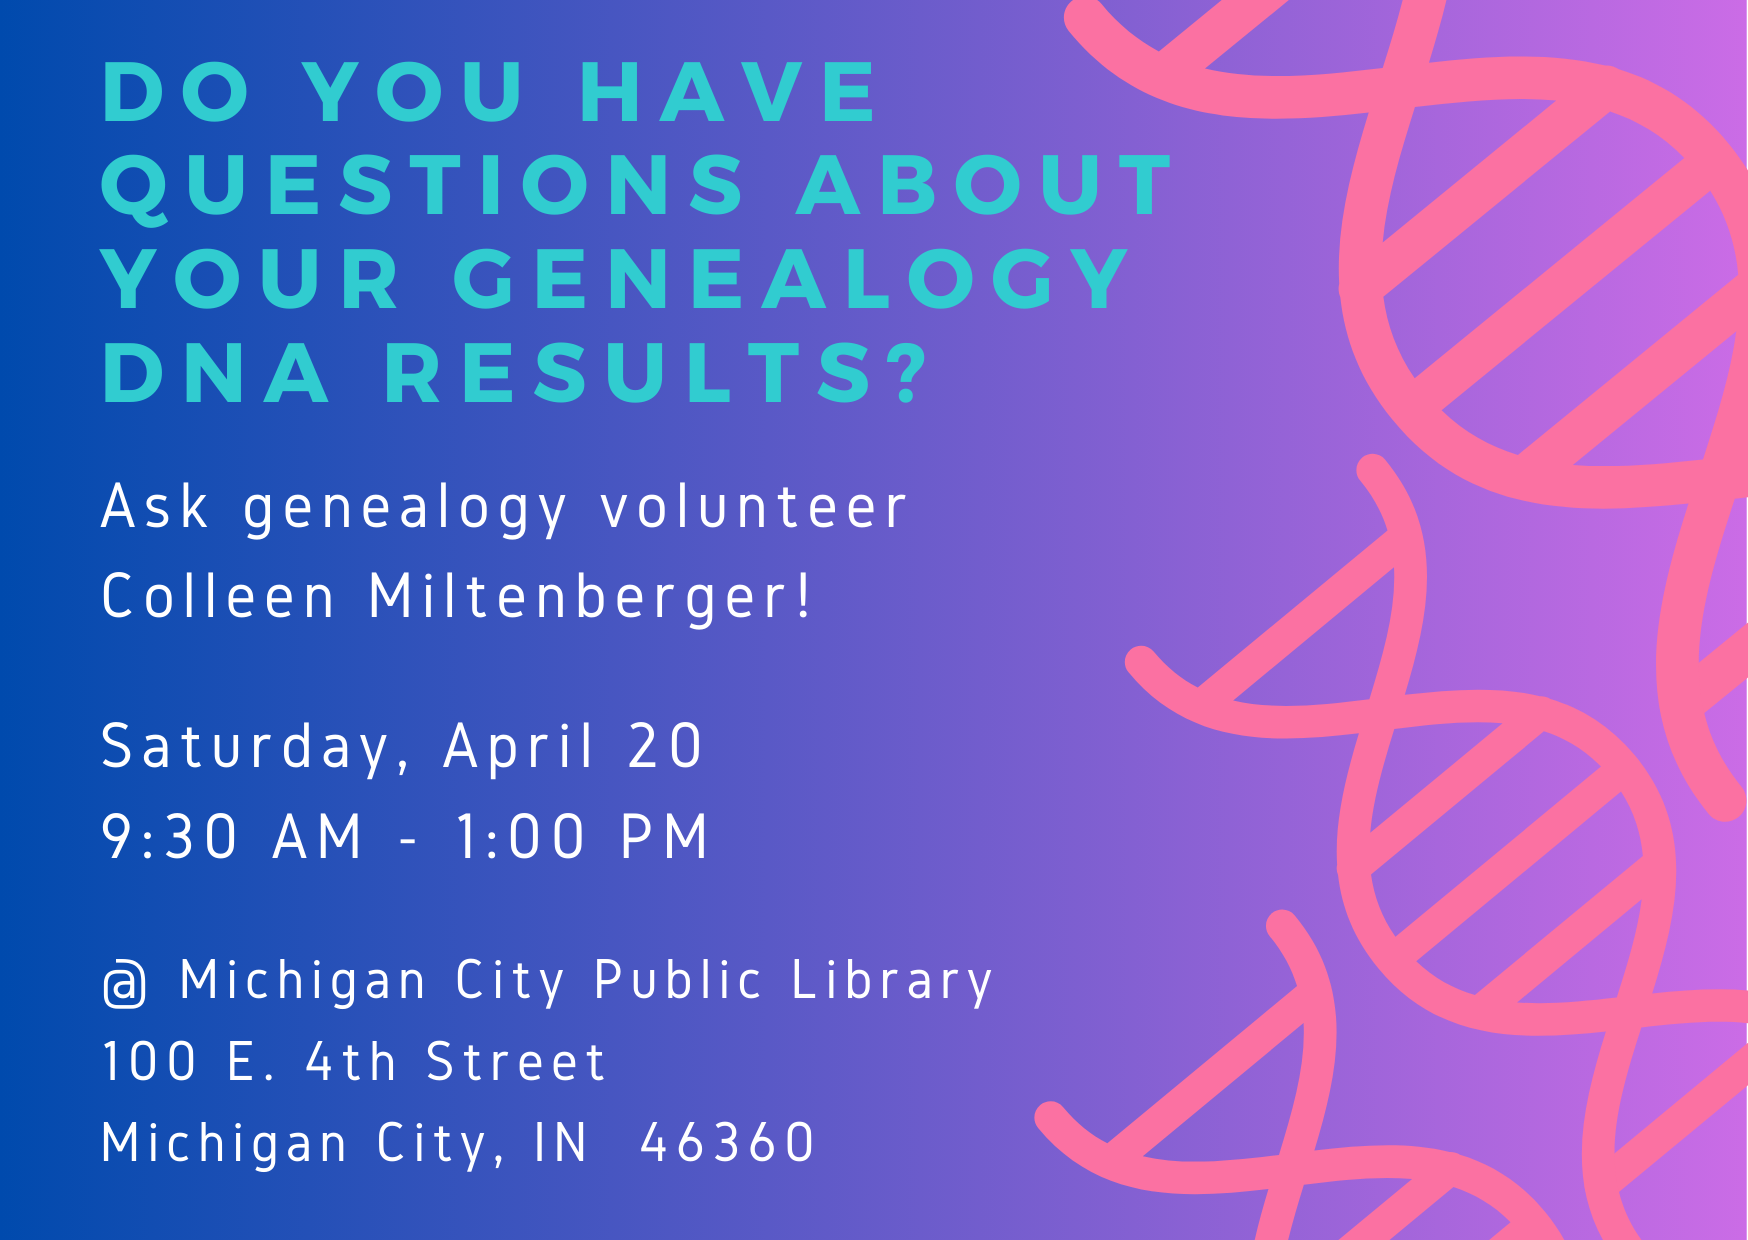 Do you have questions about your genealogy DNA results? Ask genealogy volunteer Colleen Miltenberger. Saturday, April 20, 9:30 am - 1 pm. at Michigan City Public Library